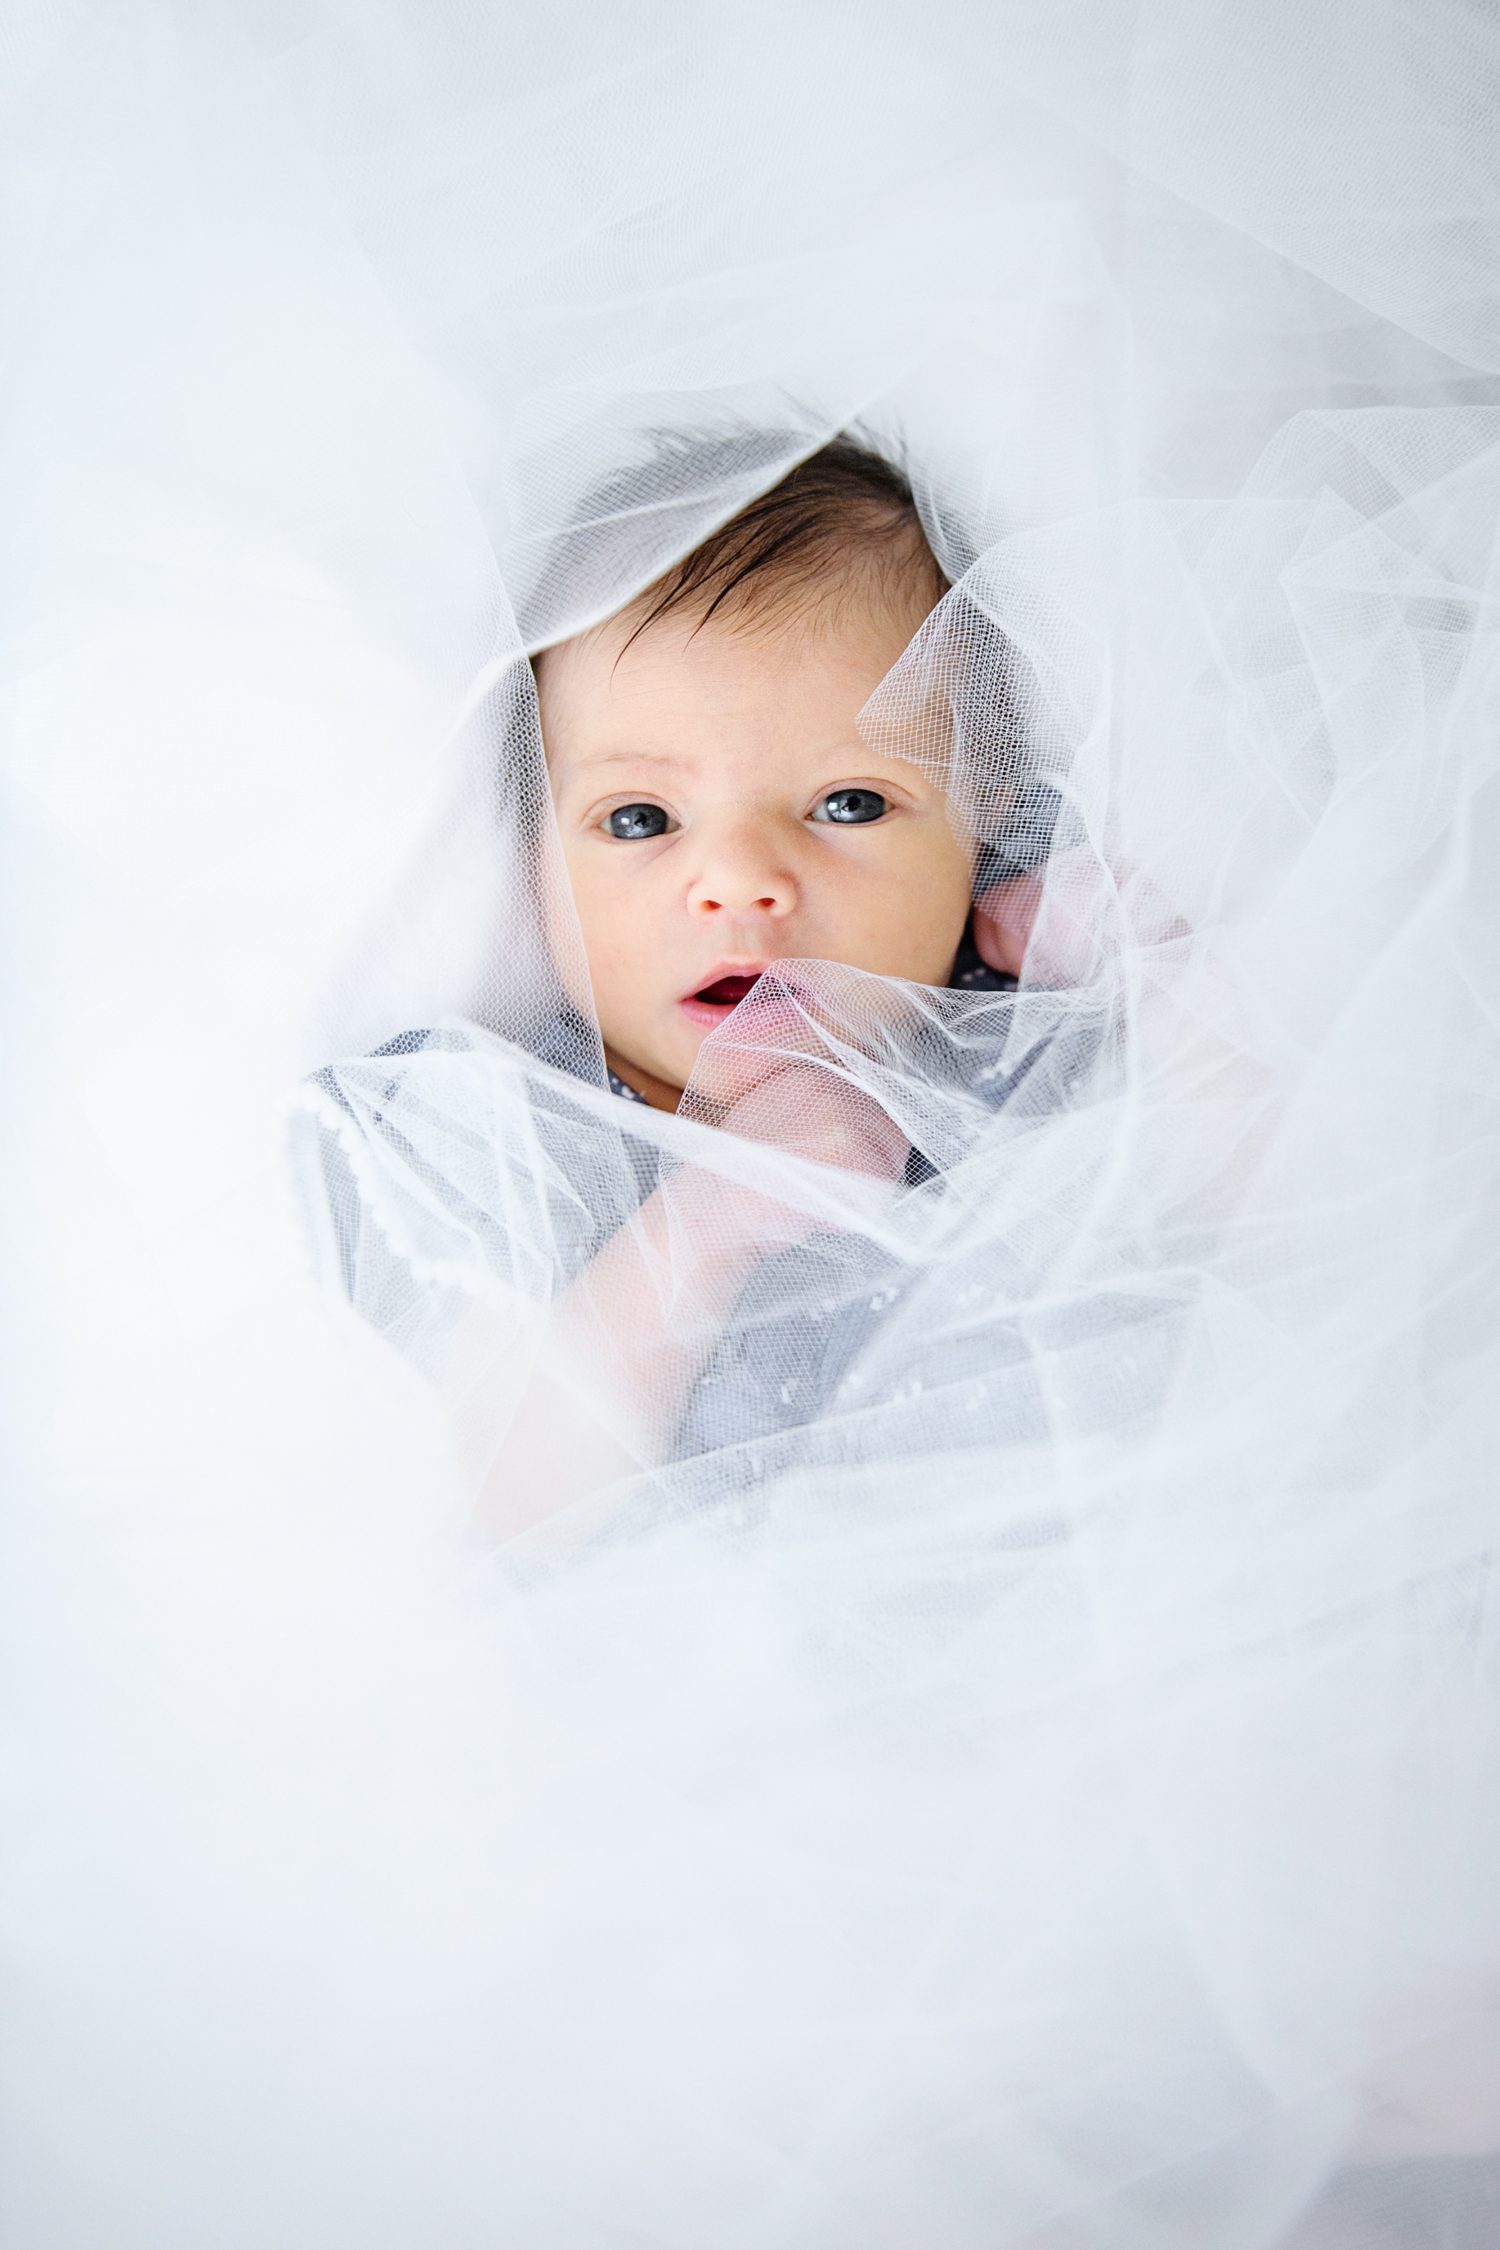 newborn wrapped in lace on wedding dress